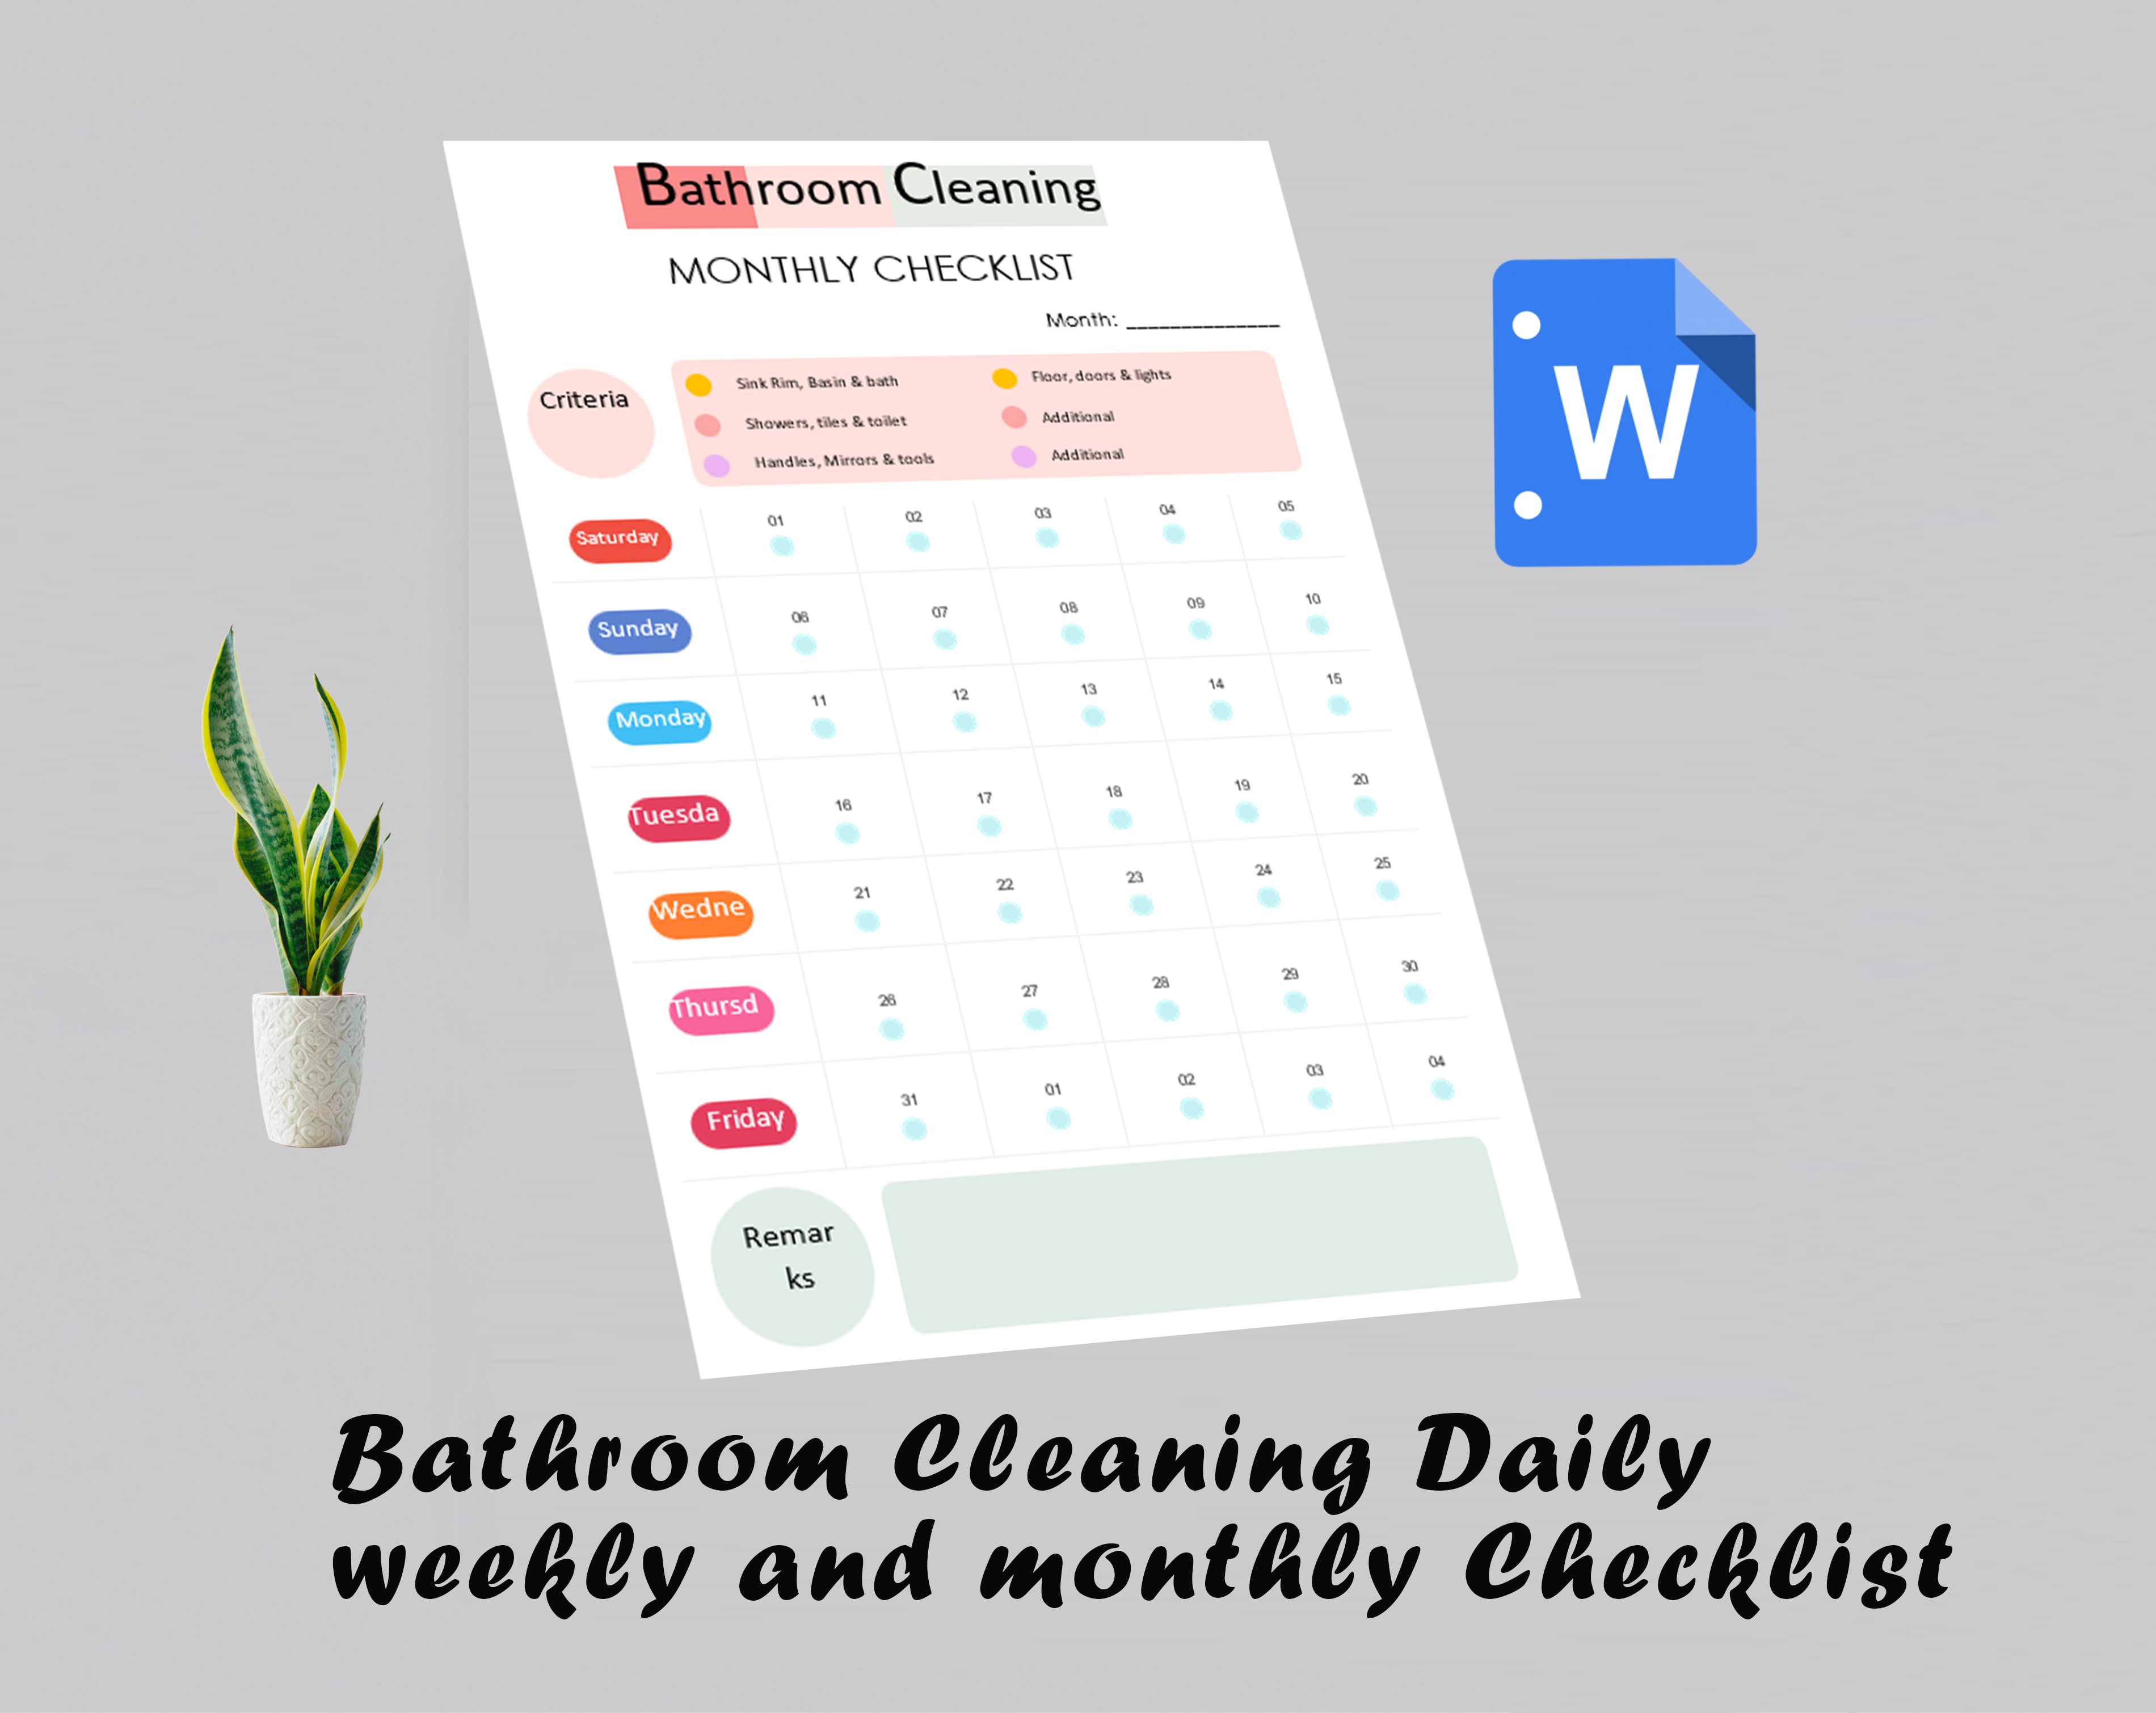 Bathroom Cleaning Daily weekly and monthly Checklist